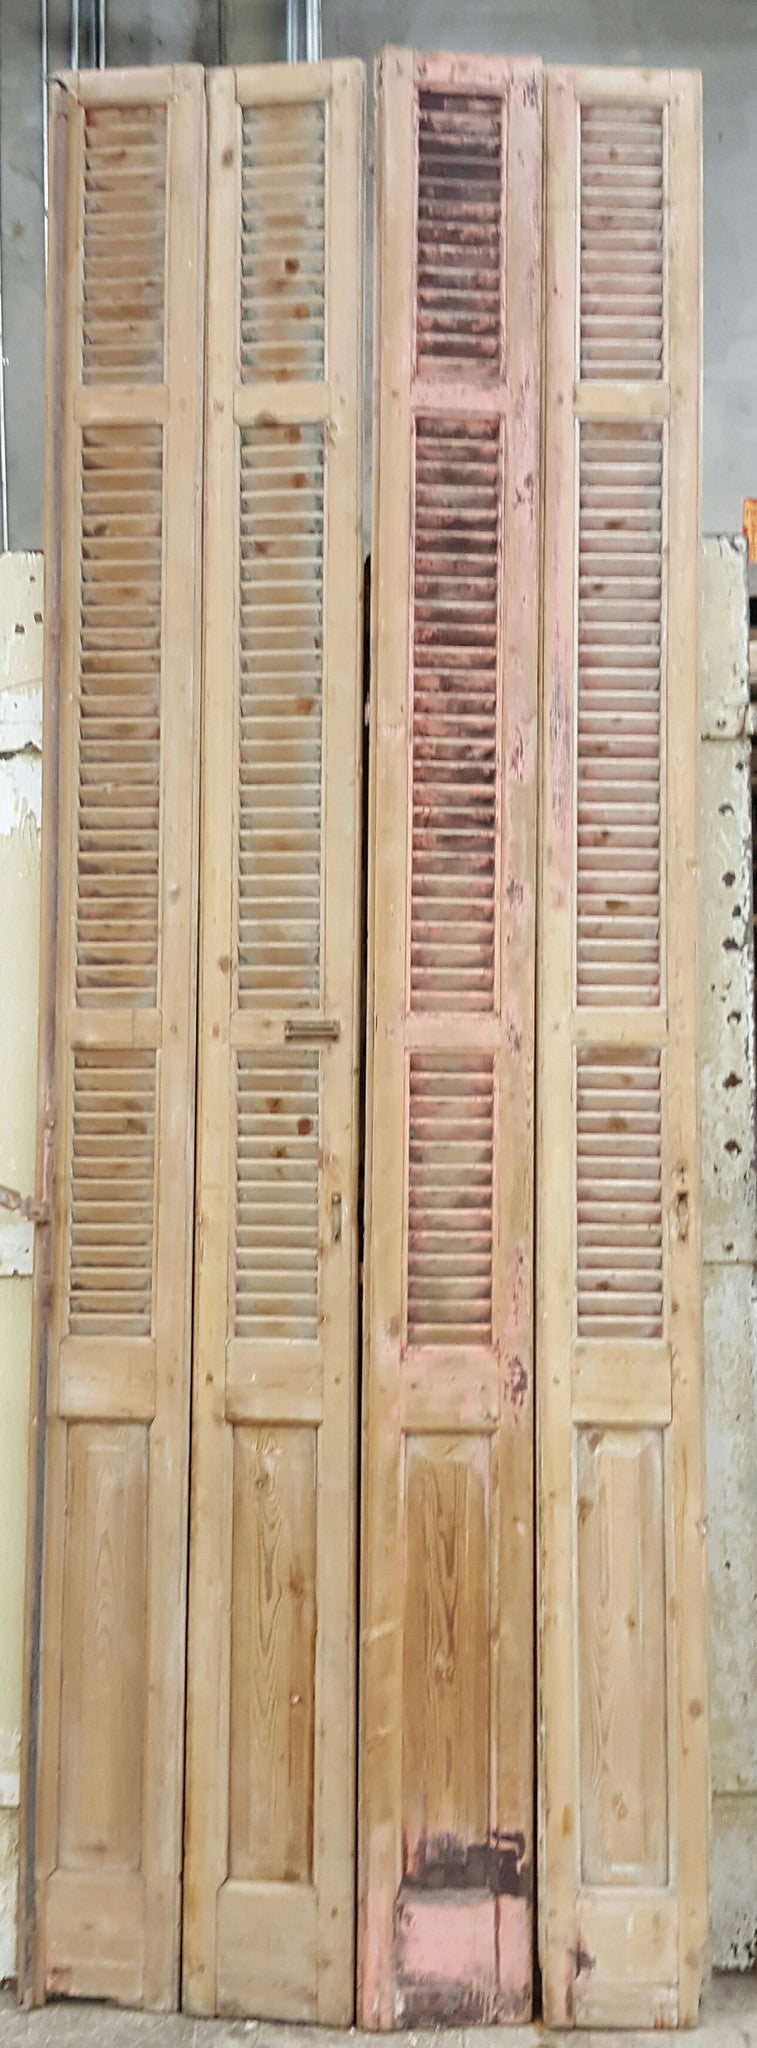 Set of 4 Narrow French Shutters